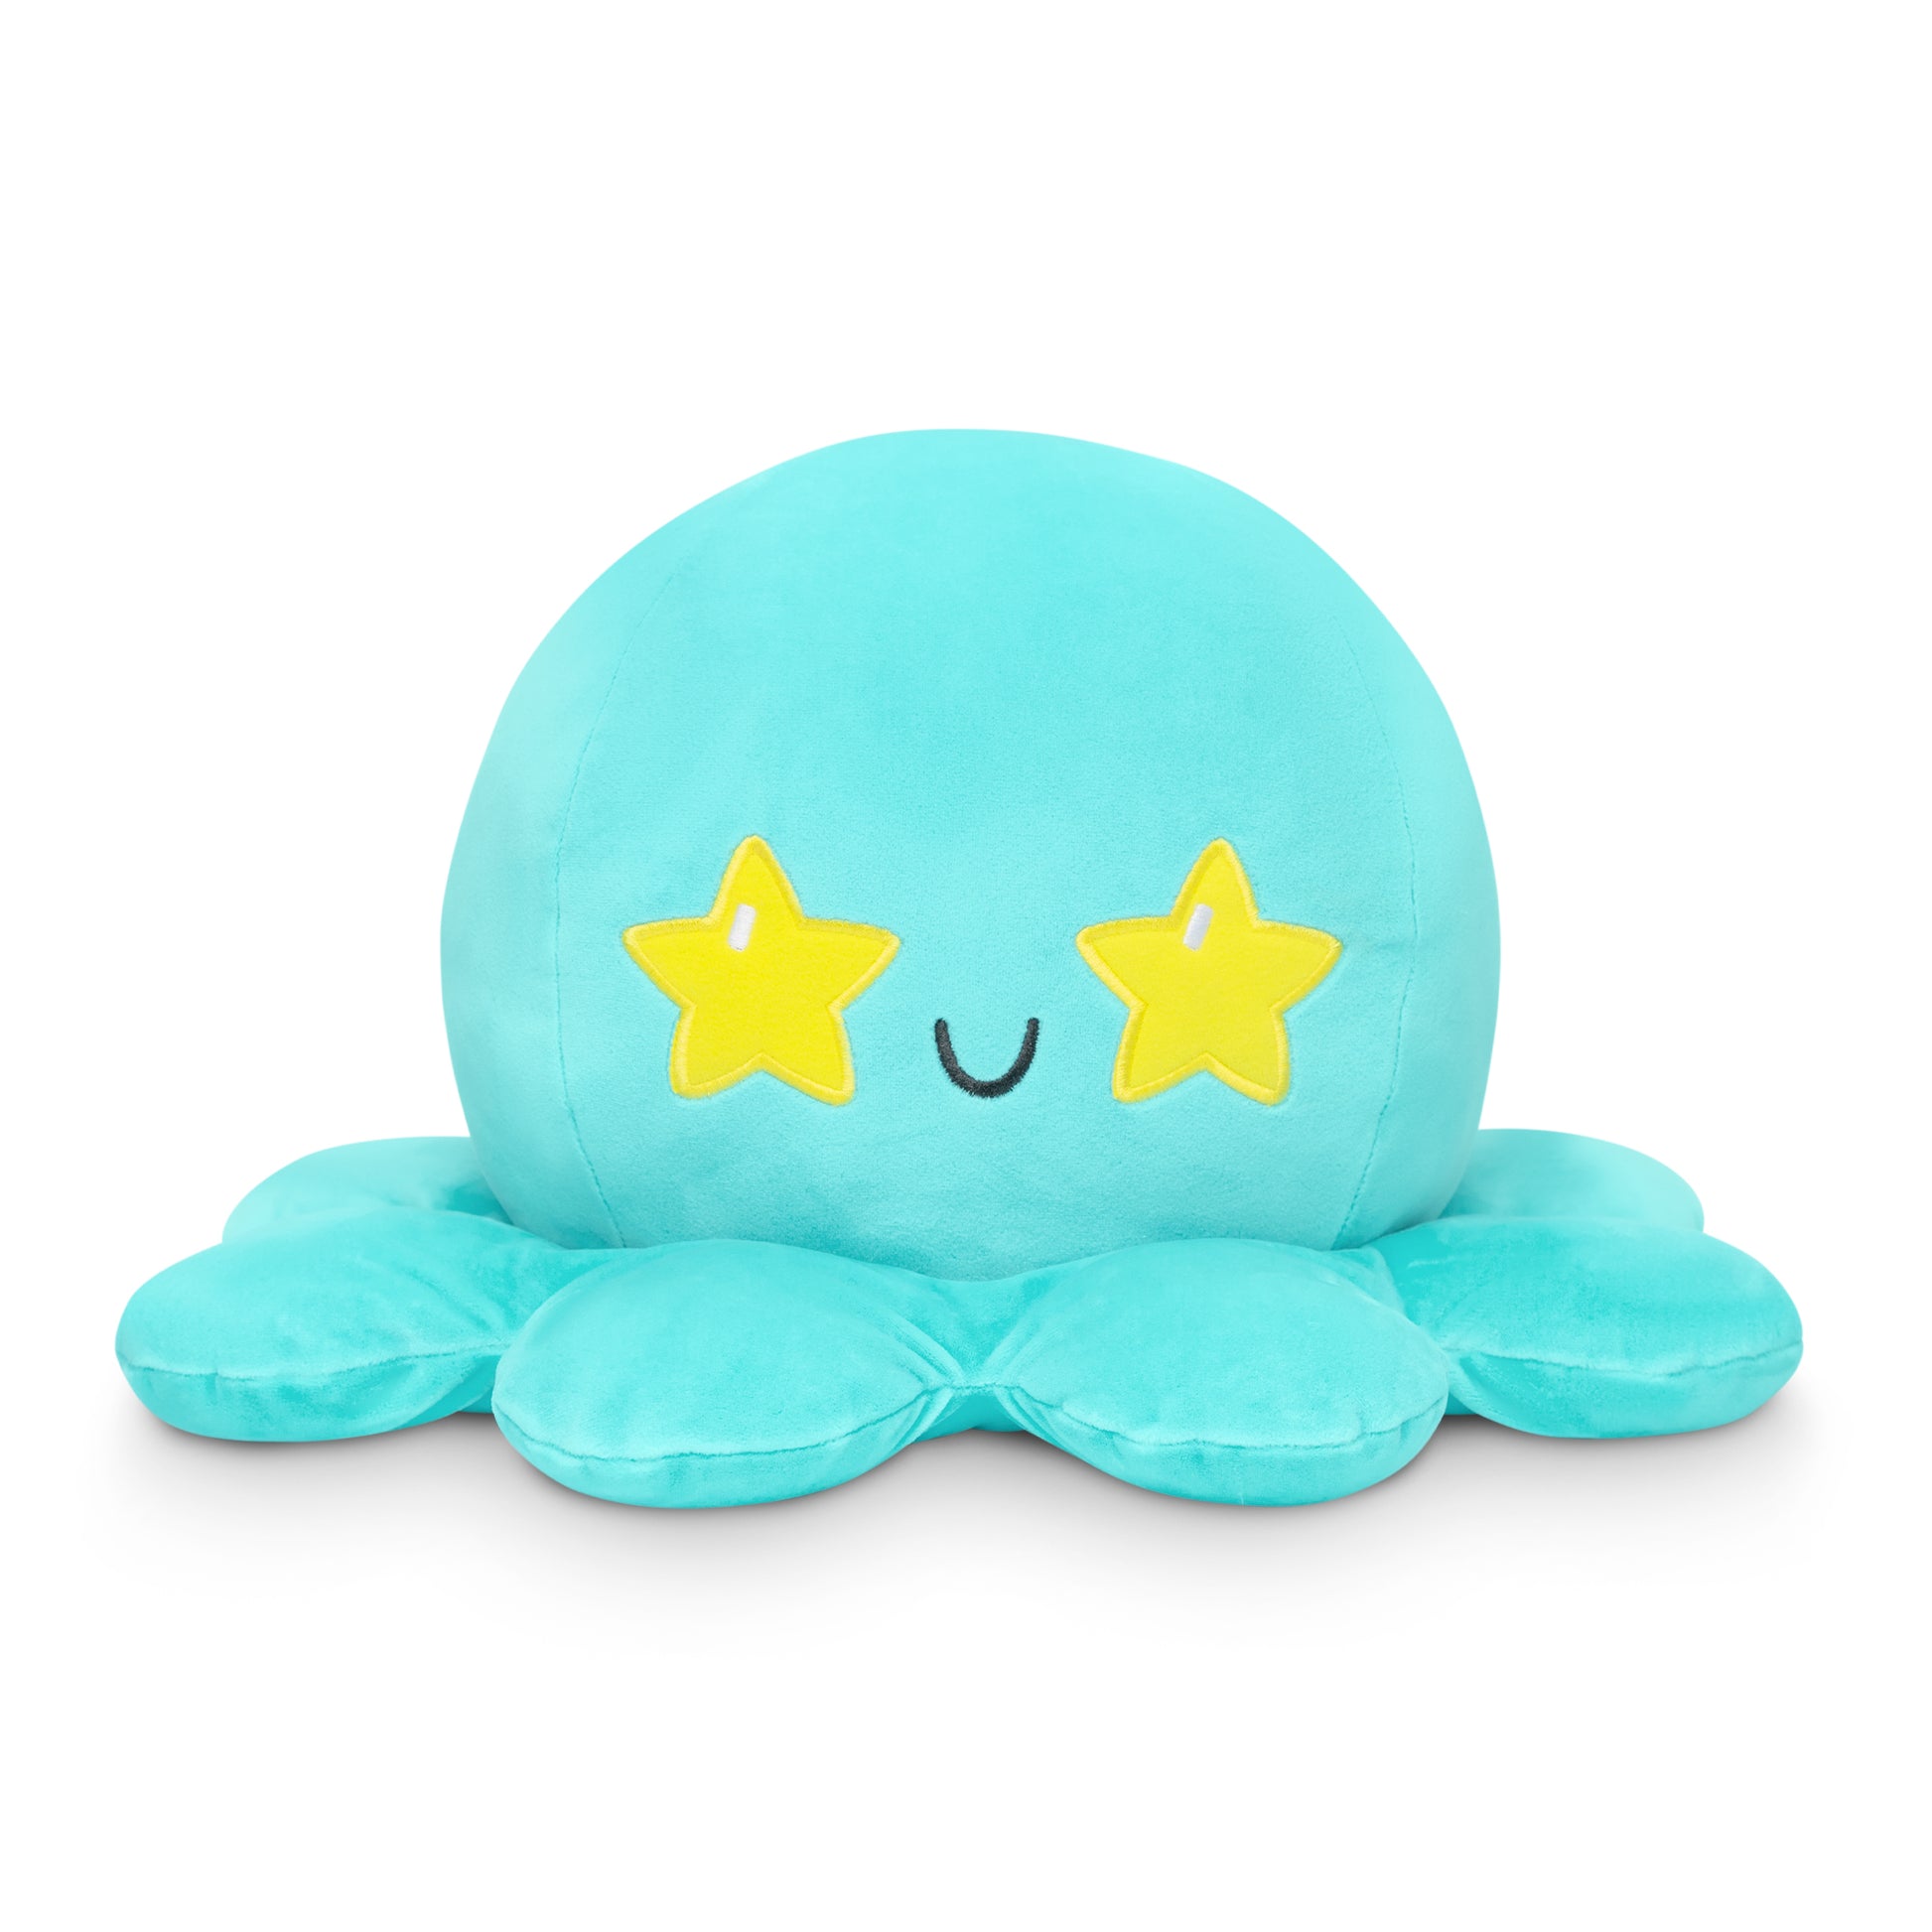 A TeeTurtle Giant Moody Octopus Plushie, in the shape of a blue octopus, perfect for cuddling with its stars design.